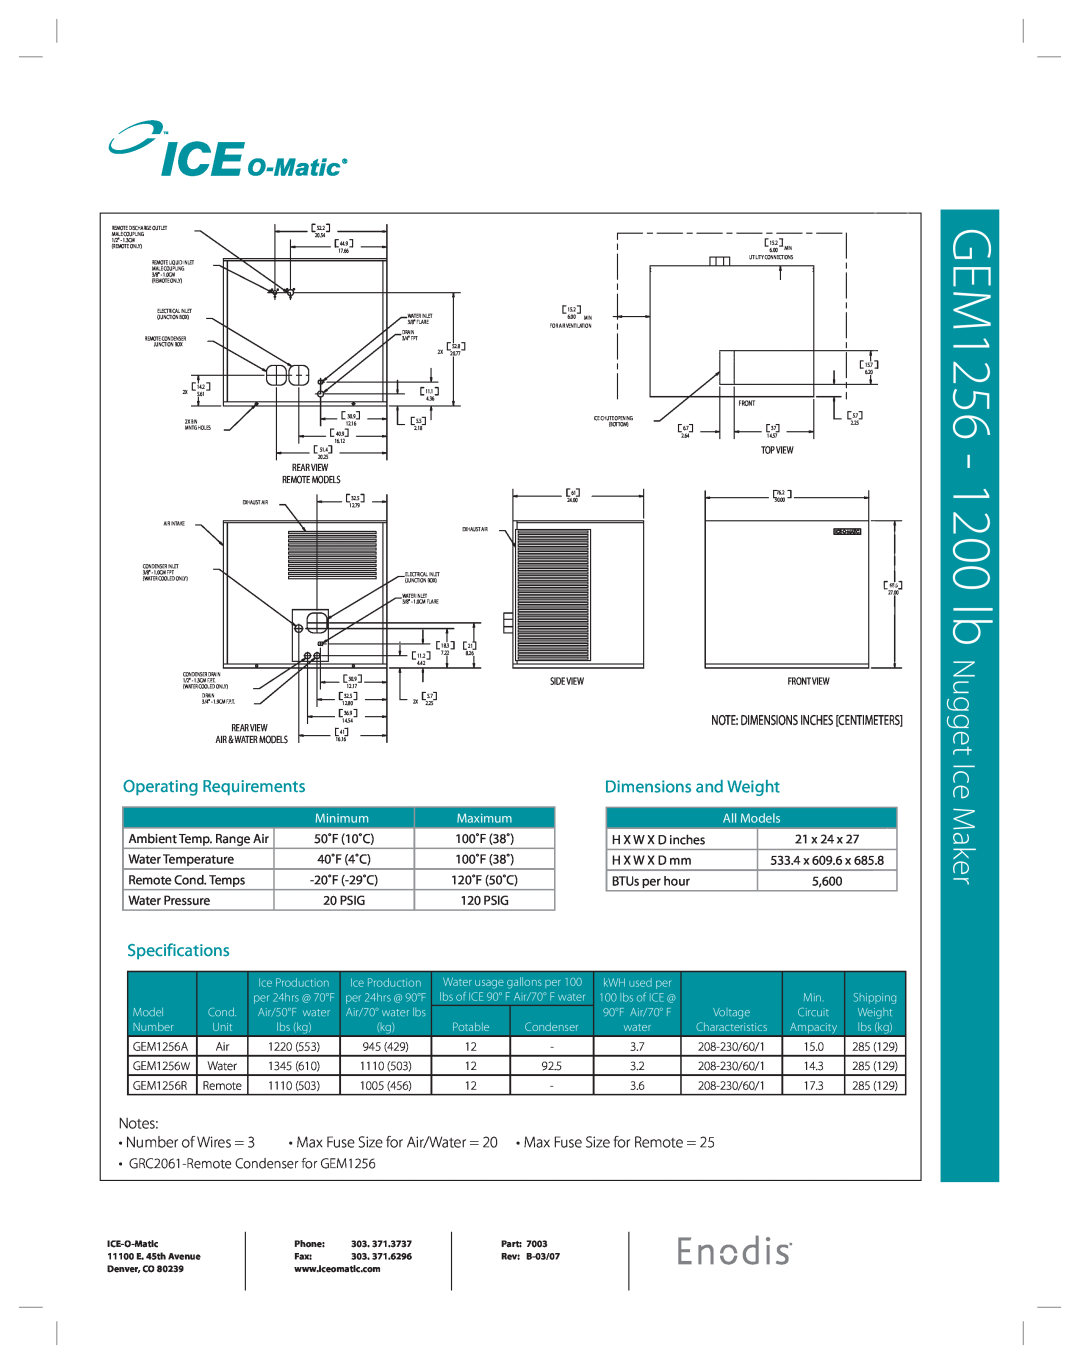 Ice-O-Matic GEM 1256 Operating Requirements, Dimensions and Weight, Specifications, GEM1256 - 1200 lb Nugget, Ice Maker 